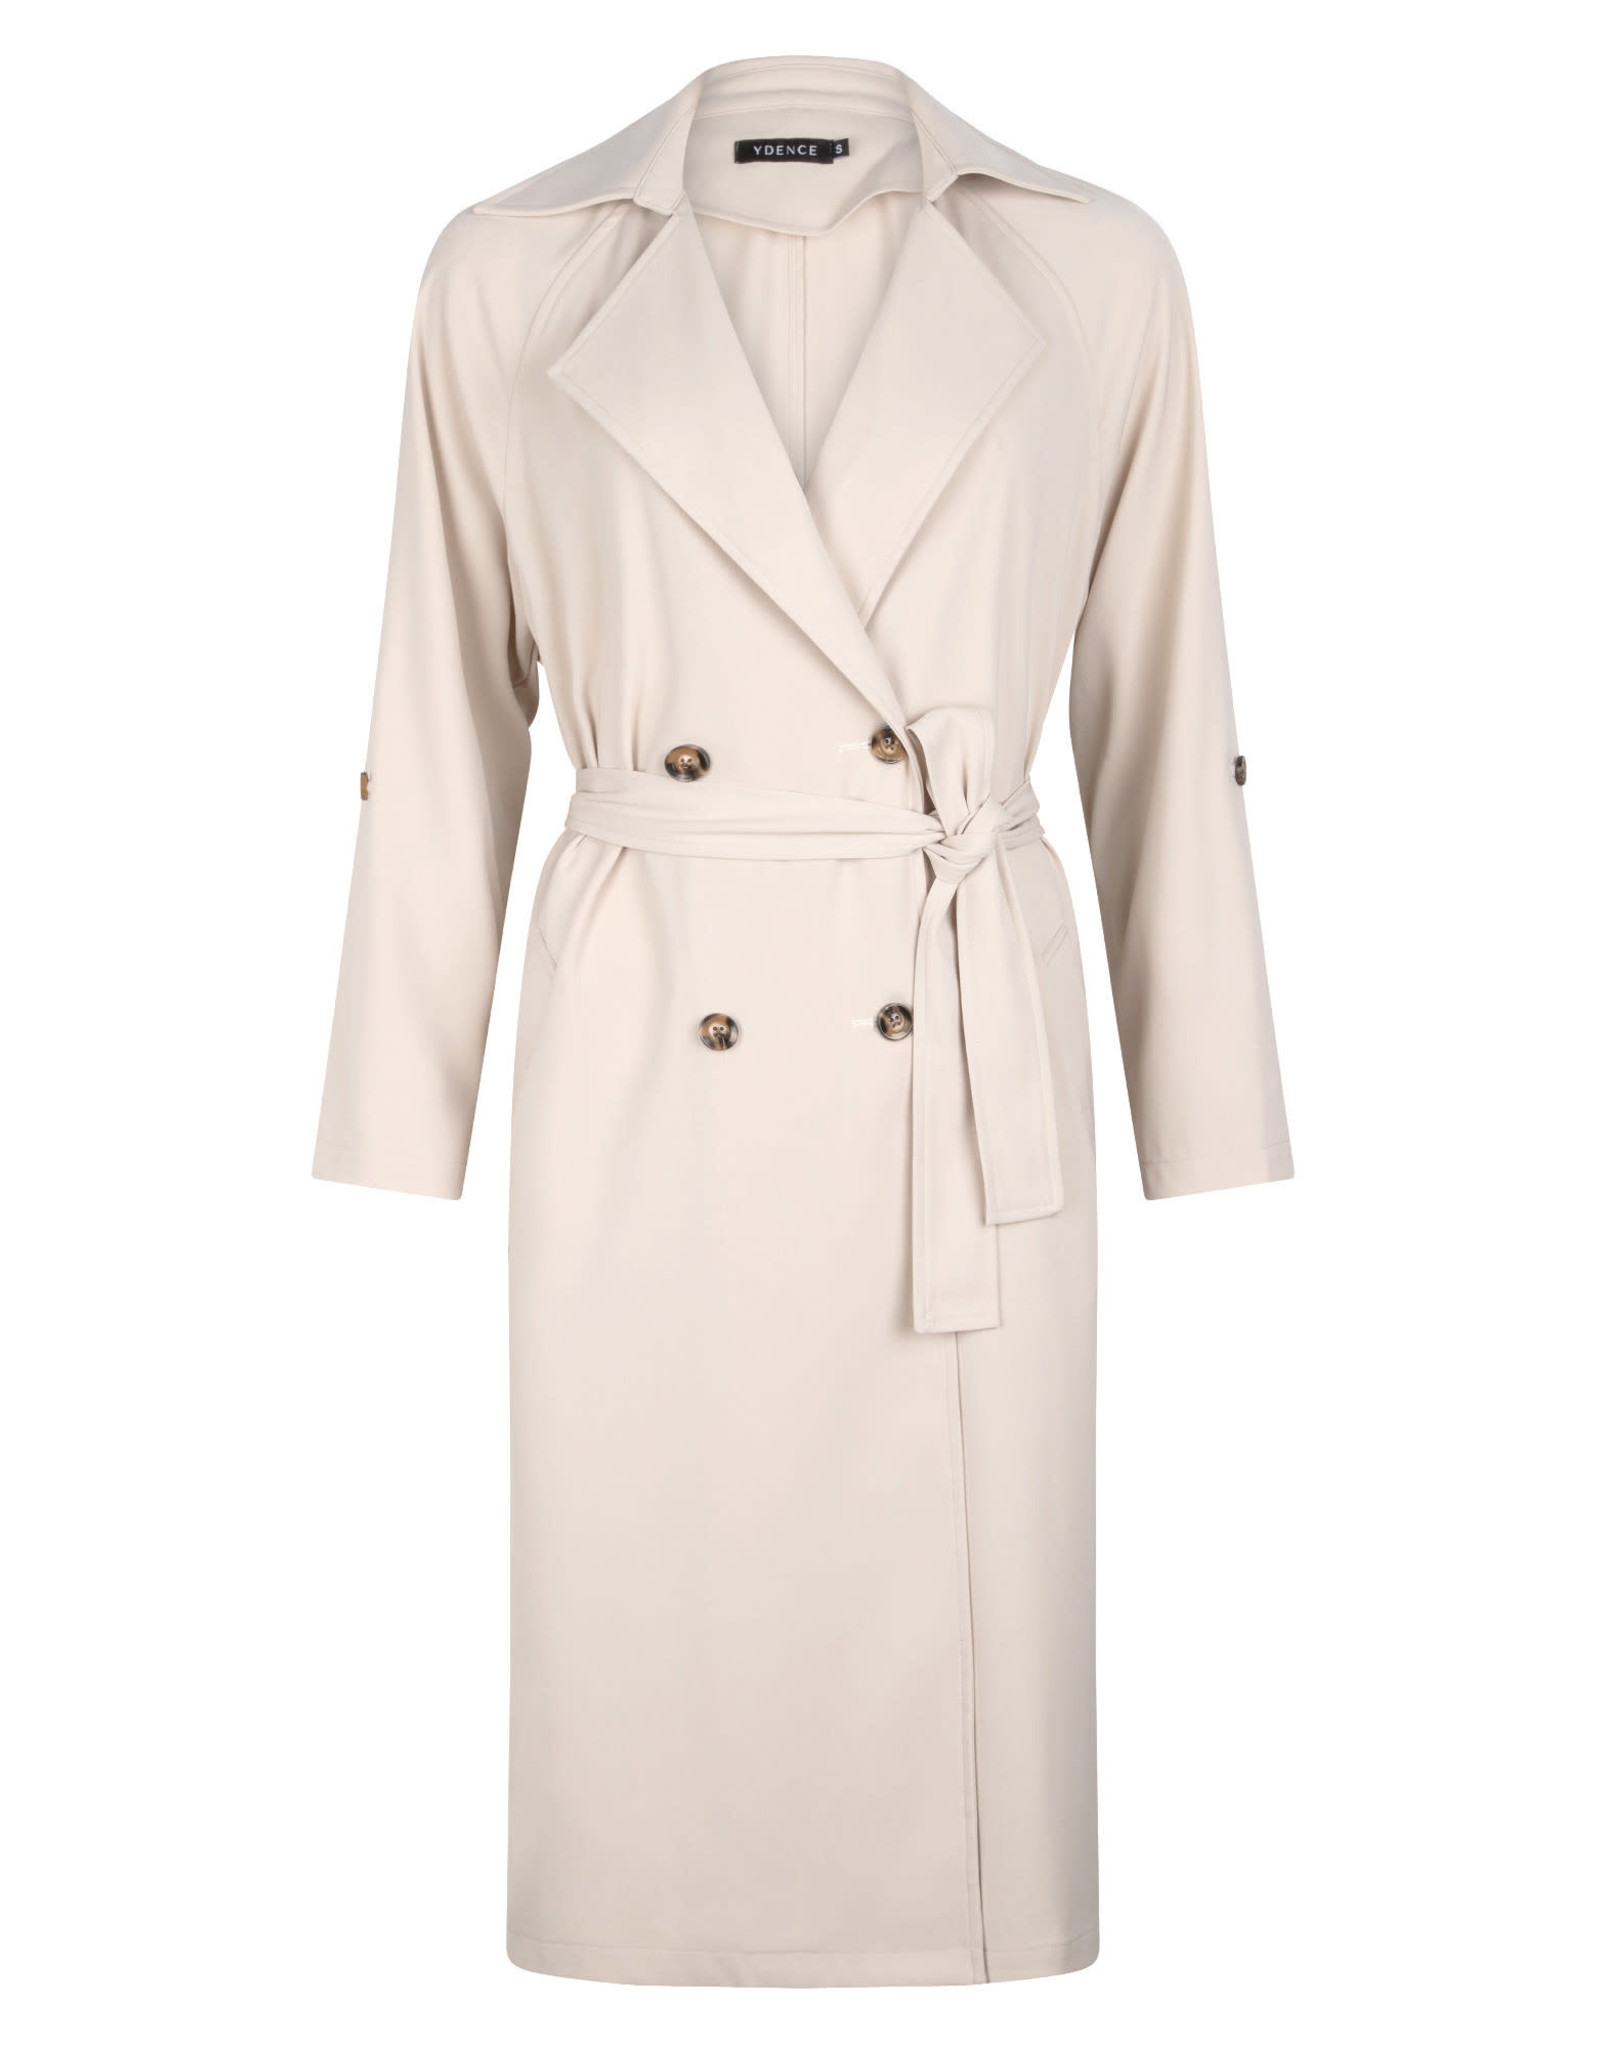 YDENCE Trenchcoat Francis - Off-white